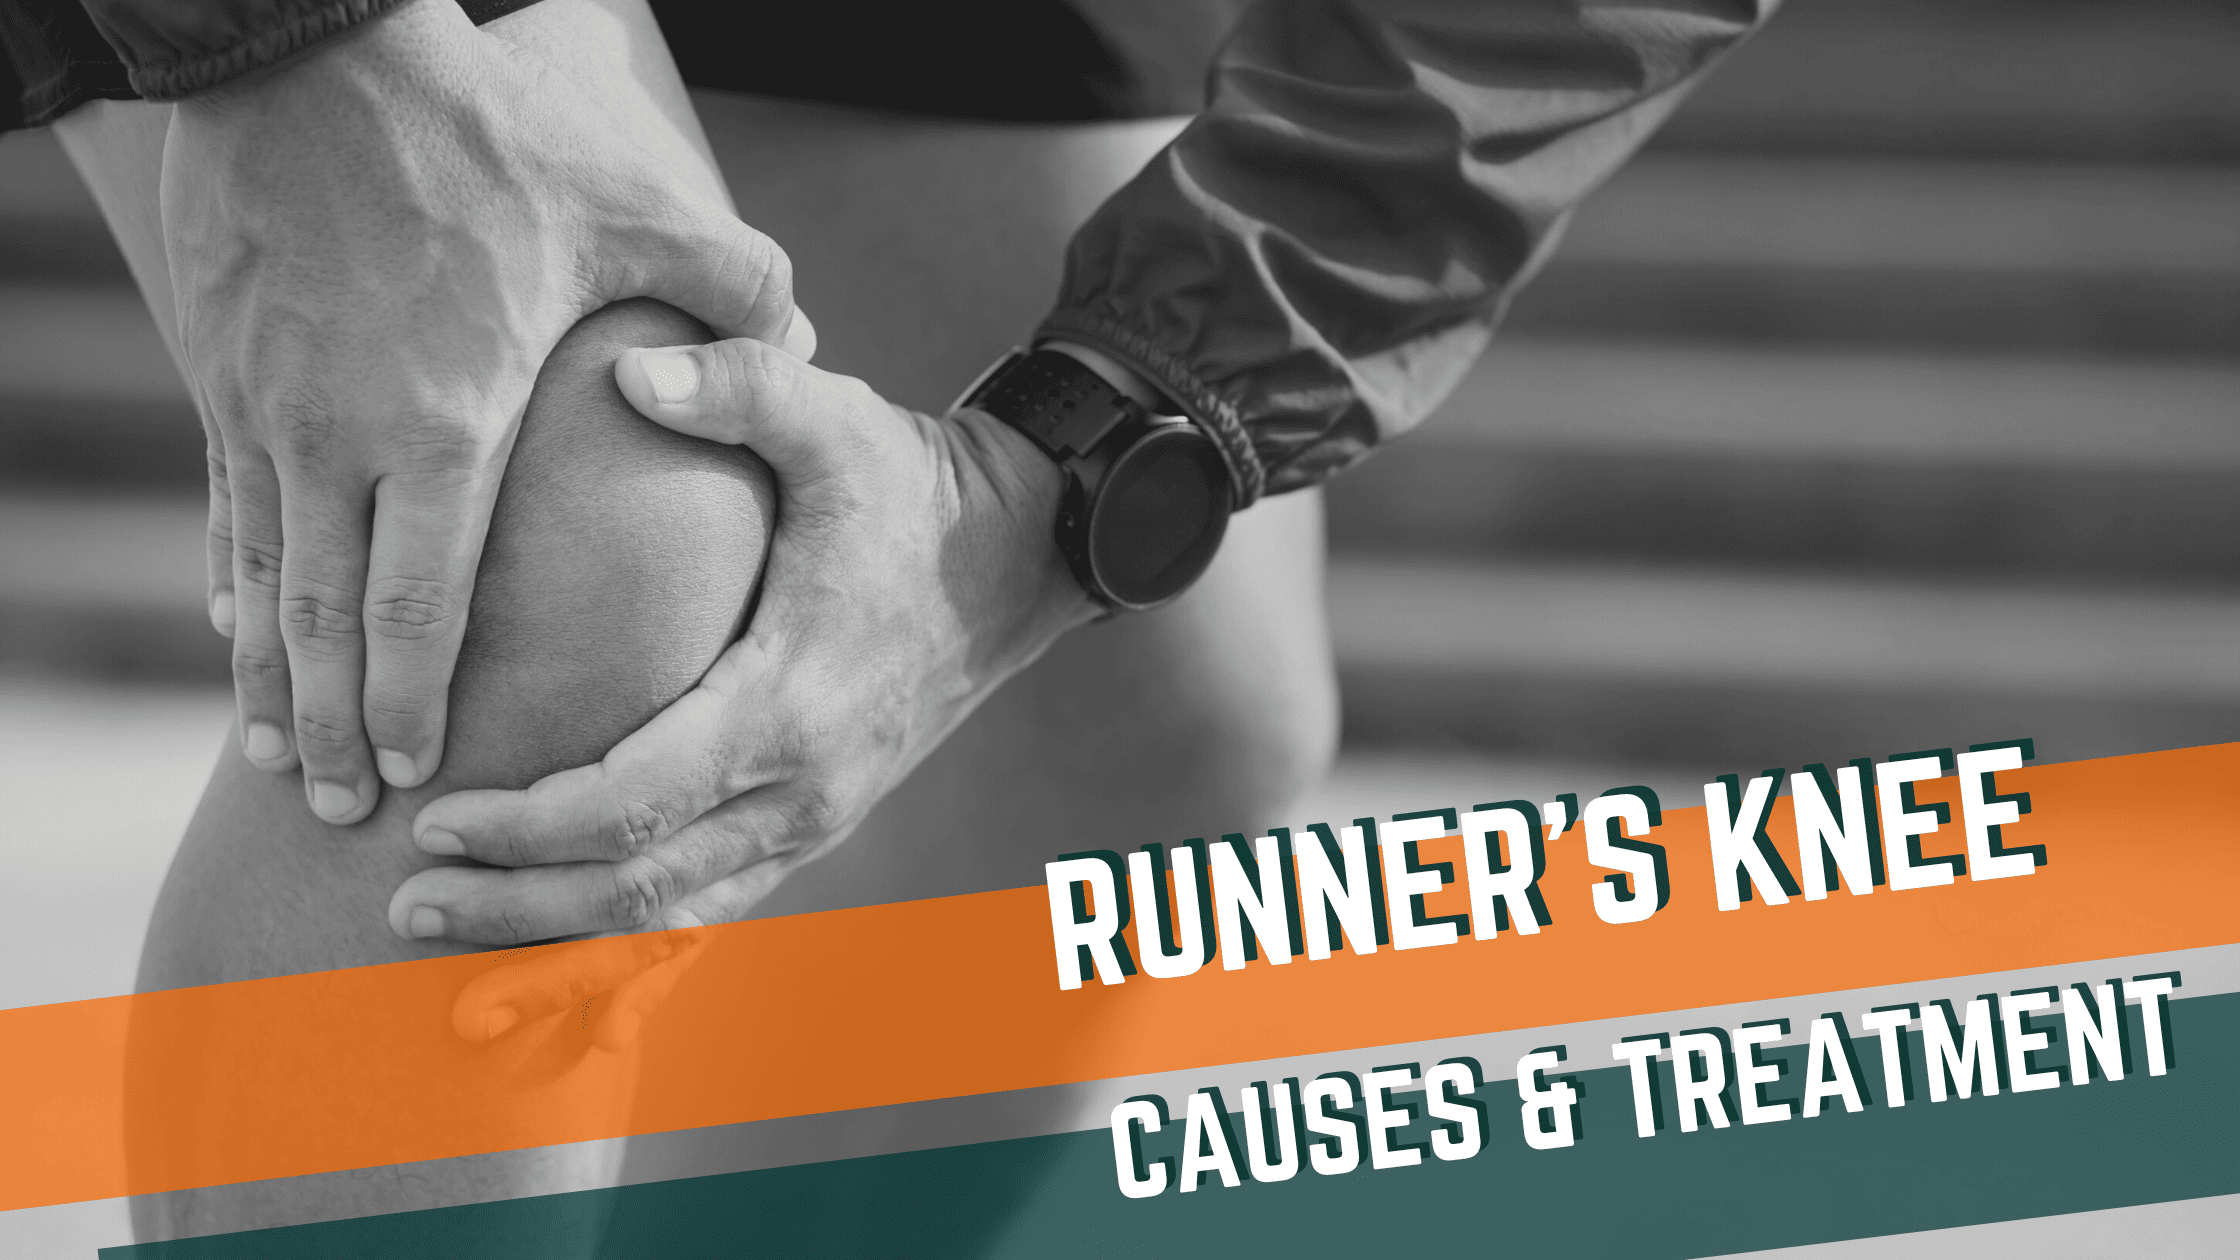 Featured image for “Runner’s Knee: Causes & Treatment”